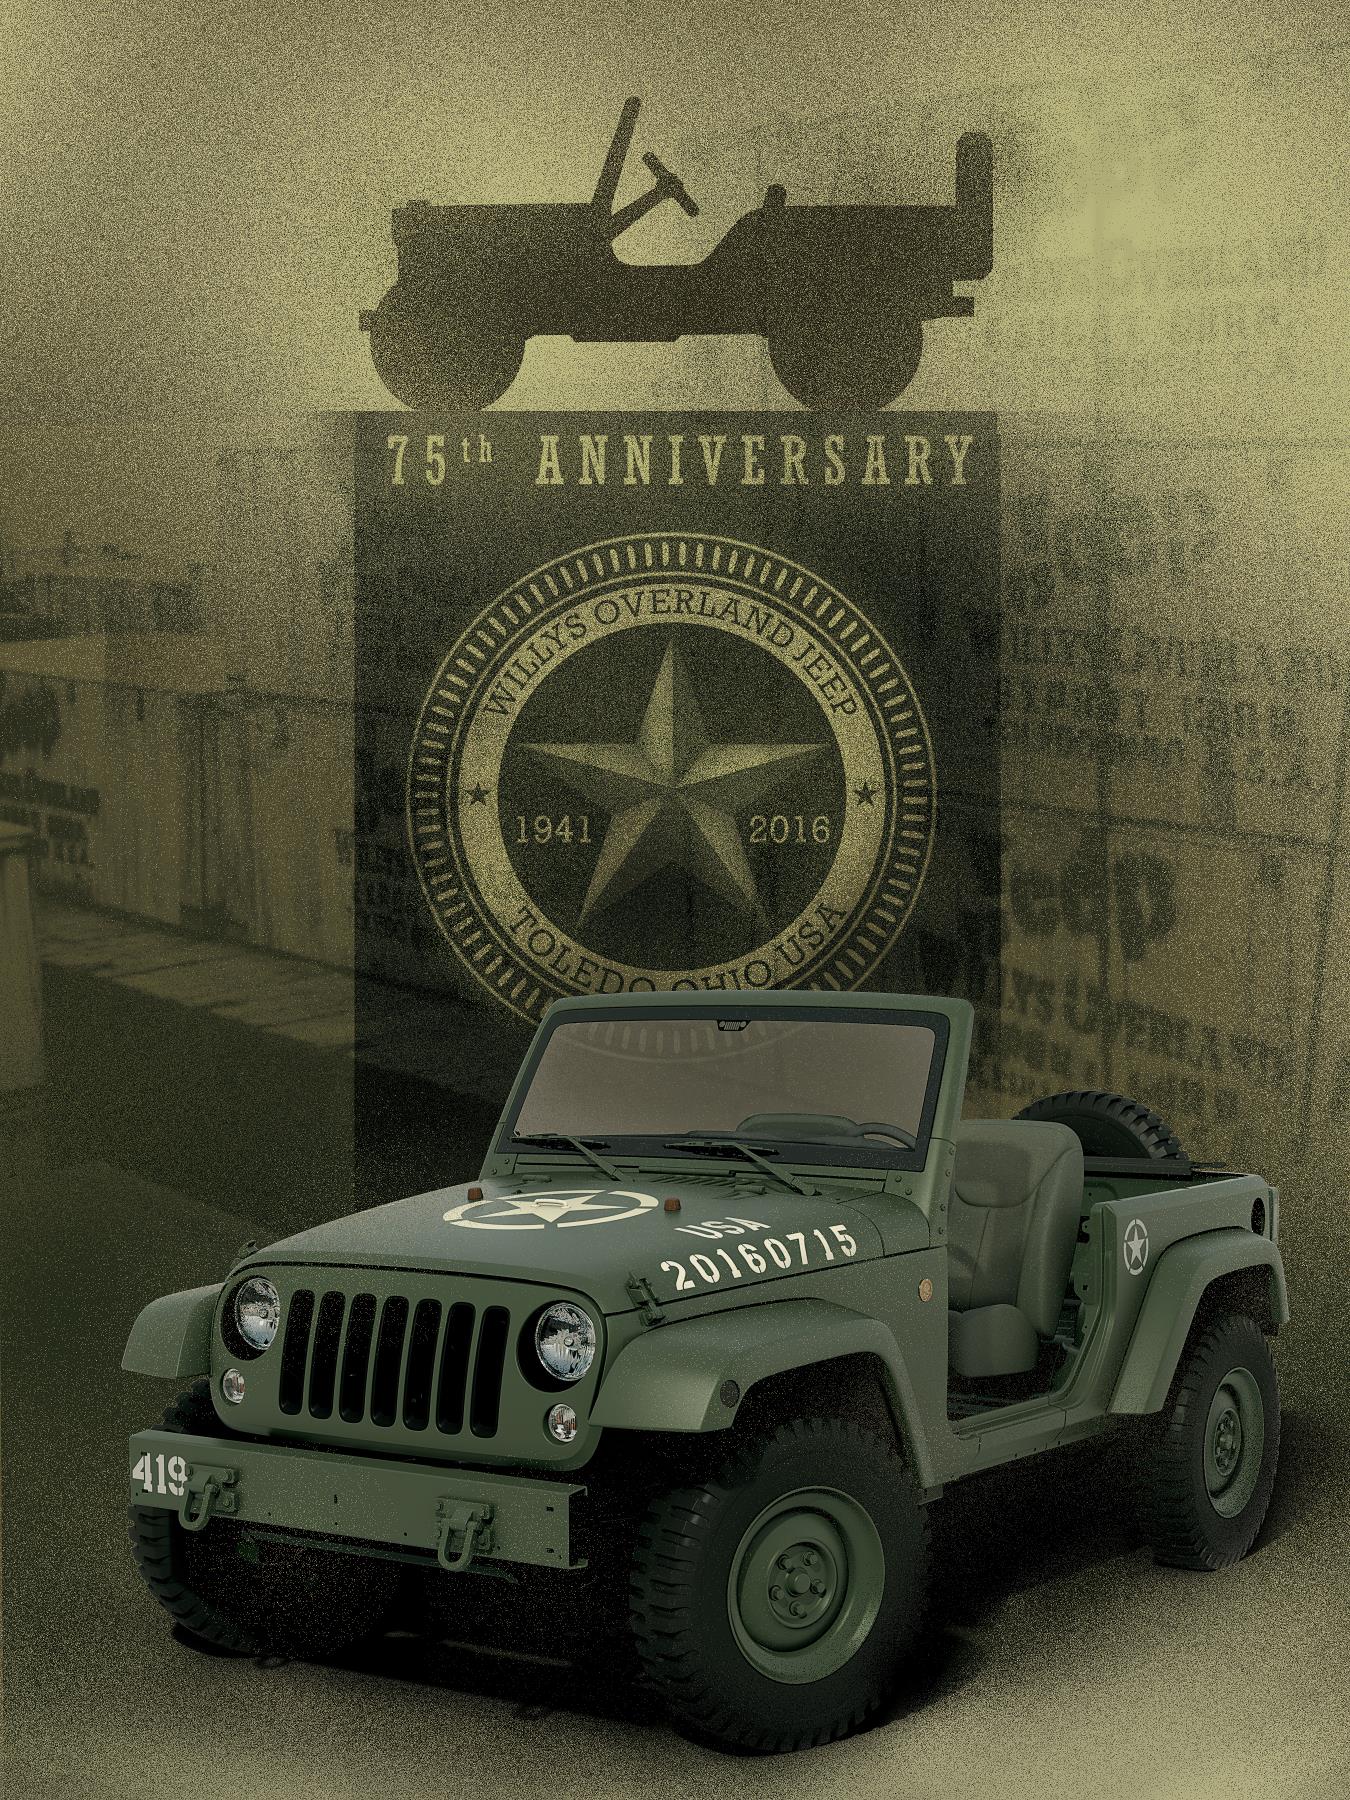 Jeep Celebrates 75th Anniversary With Wrangler Concept, Reminds Us of Willys  MB - autoevolution